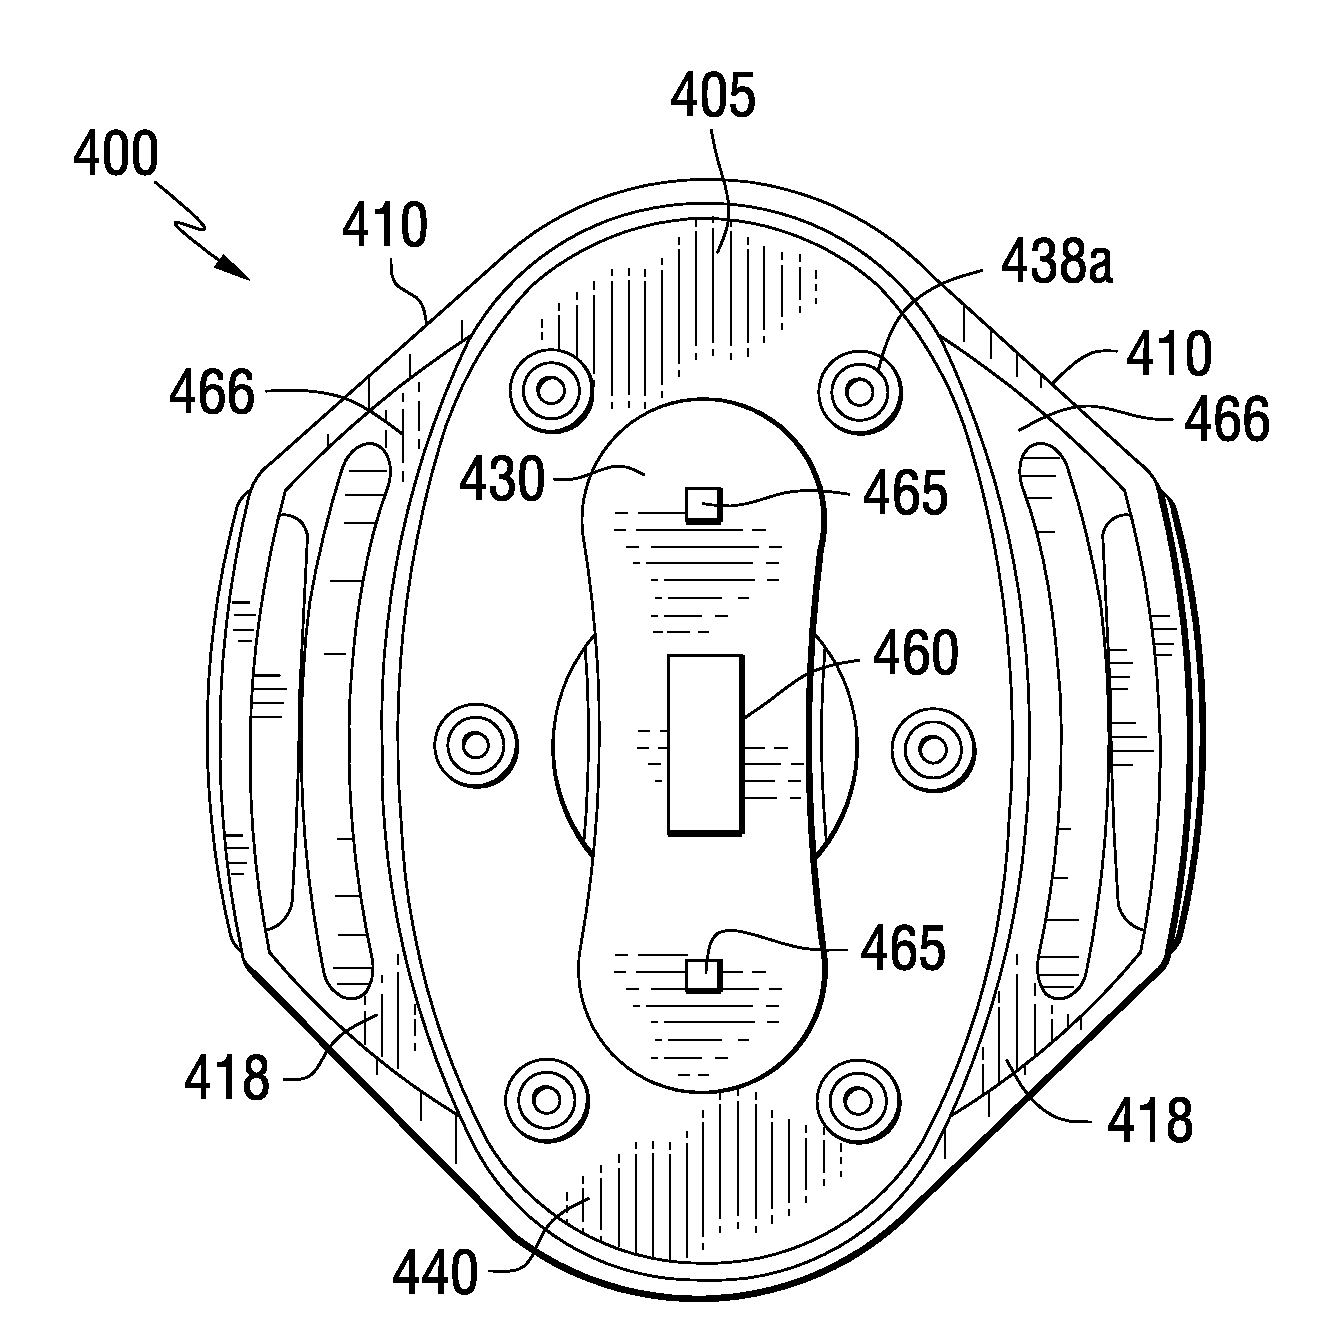 Method and apparatus for determining critical care parameters